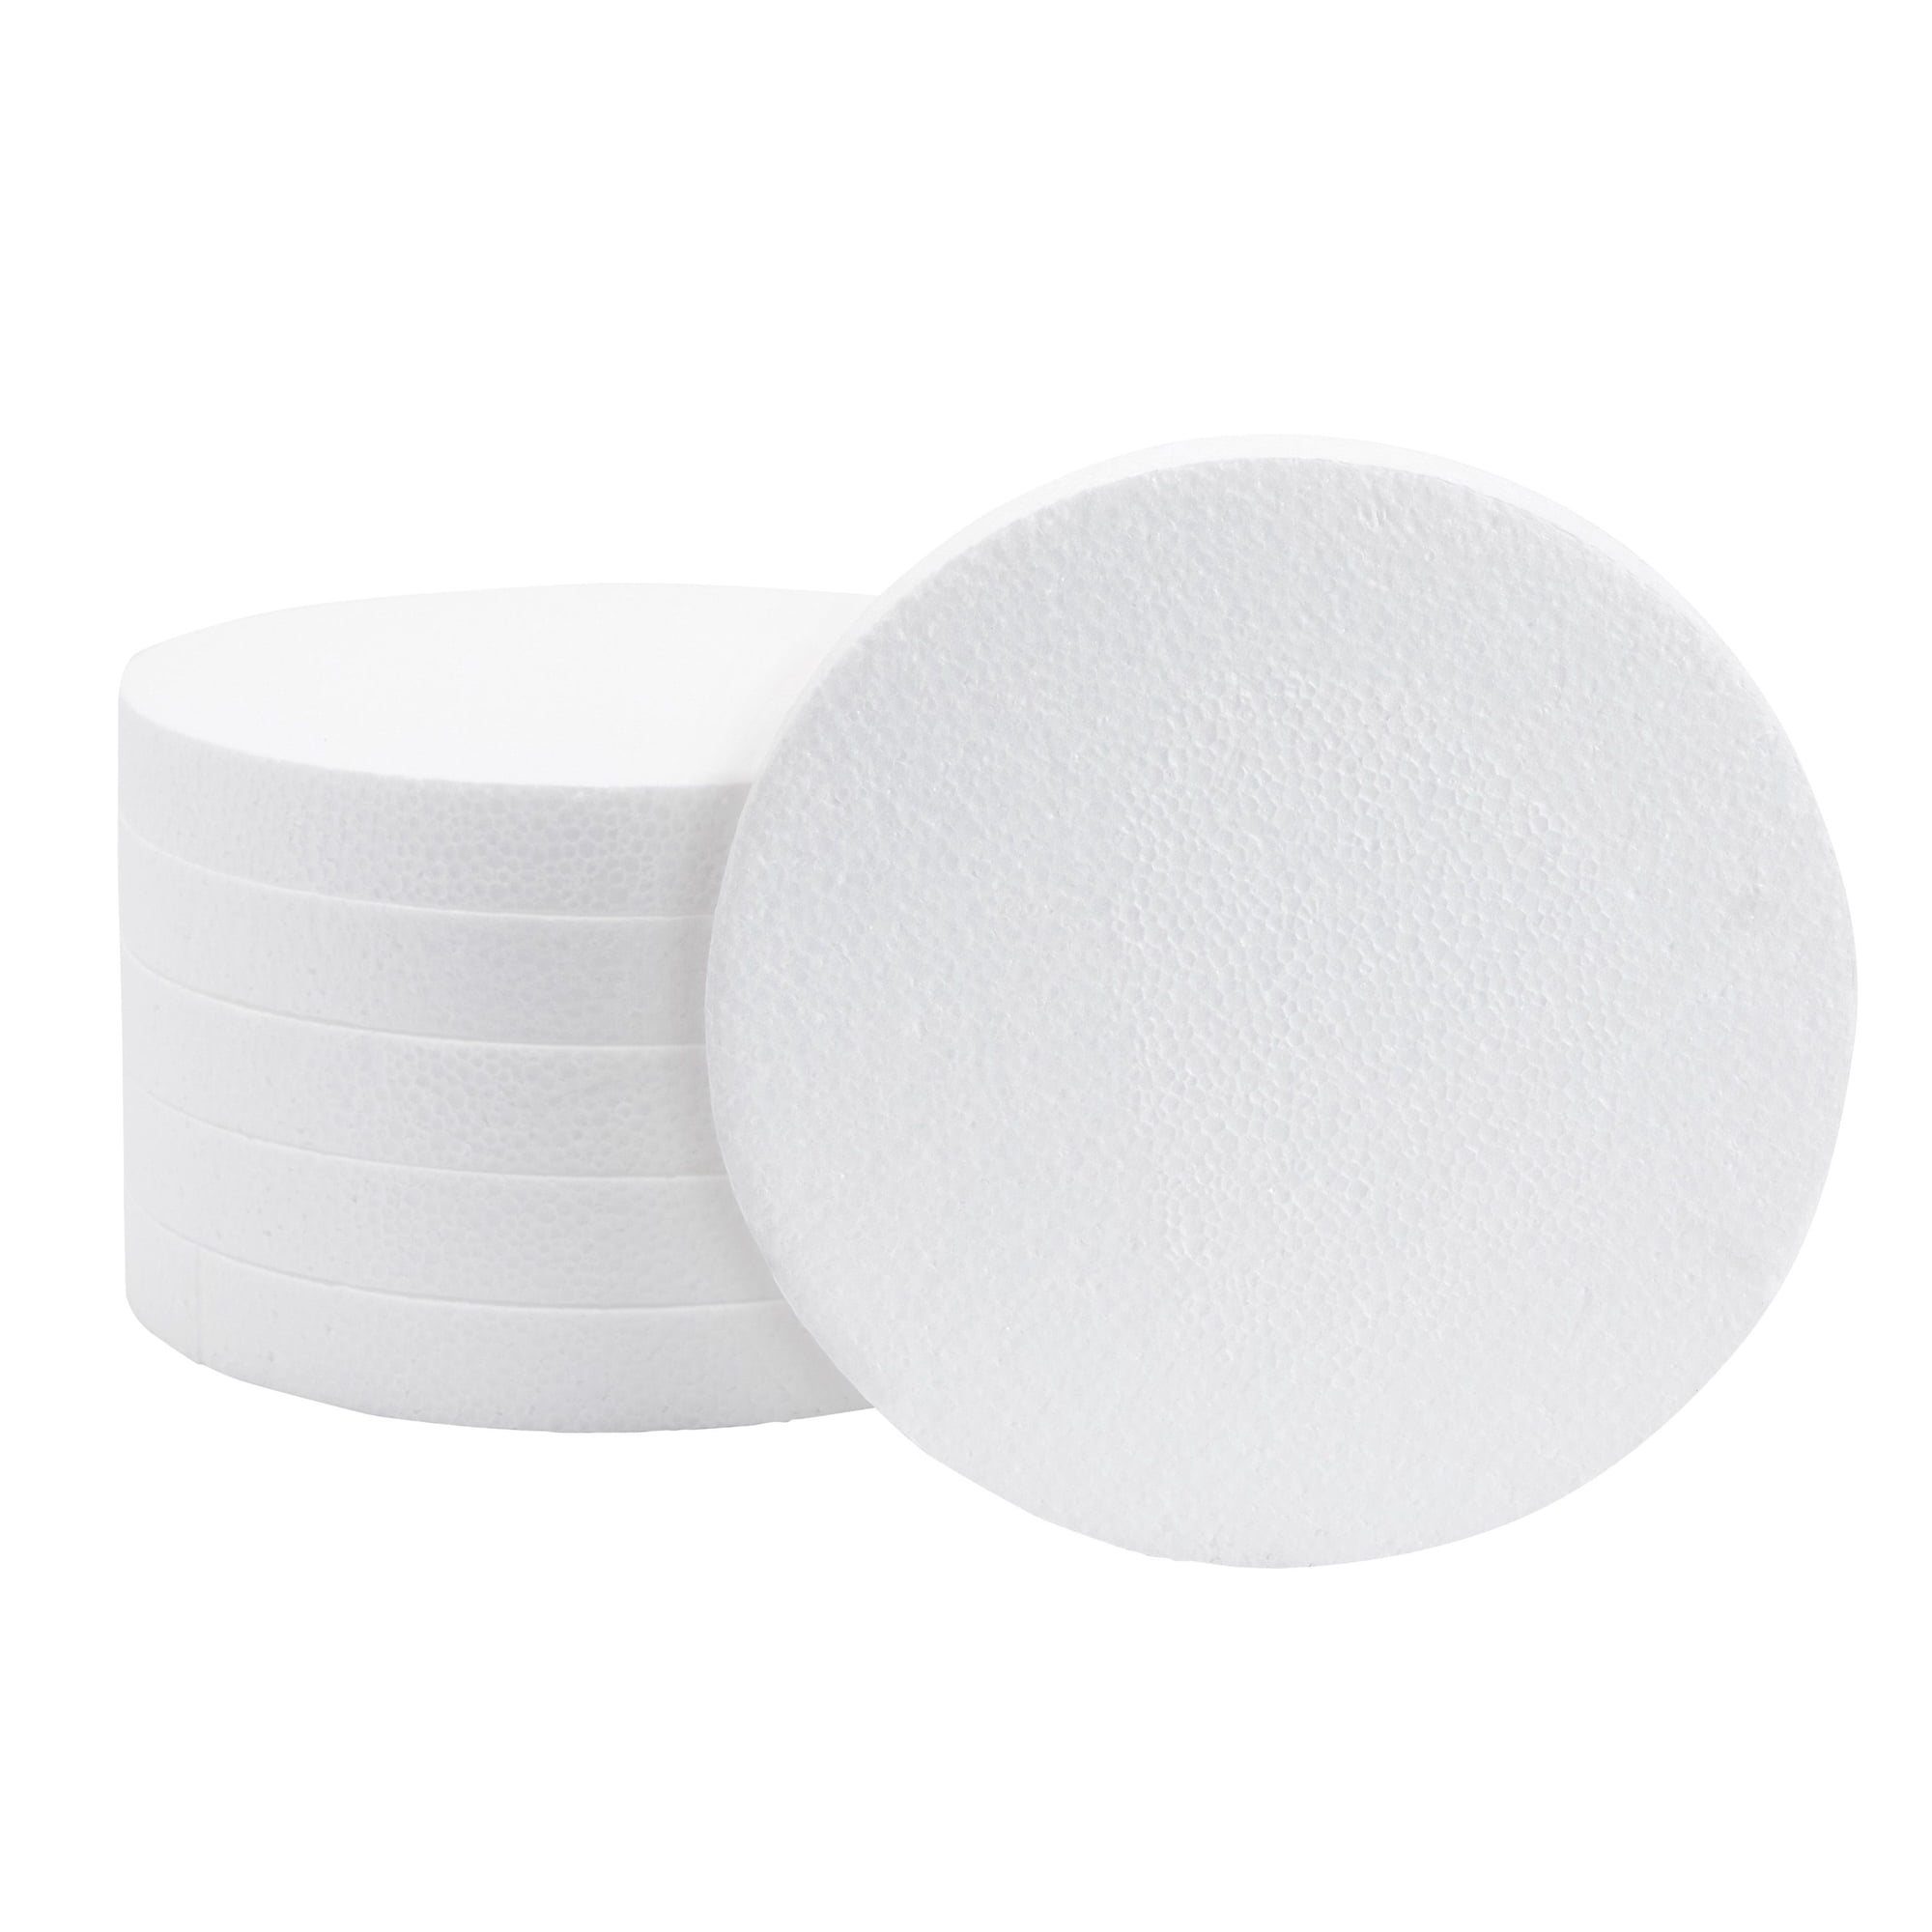 30 Craft Foam Circles with 30 Plastic Dowels (2 Sizes, 60 Pieces), PACK -  Kroger